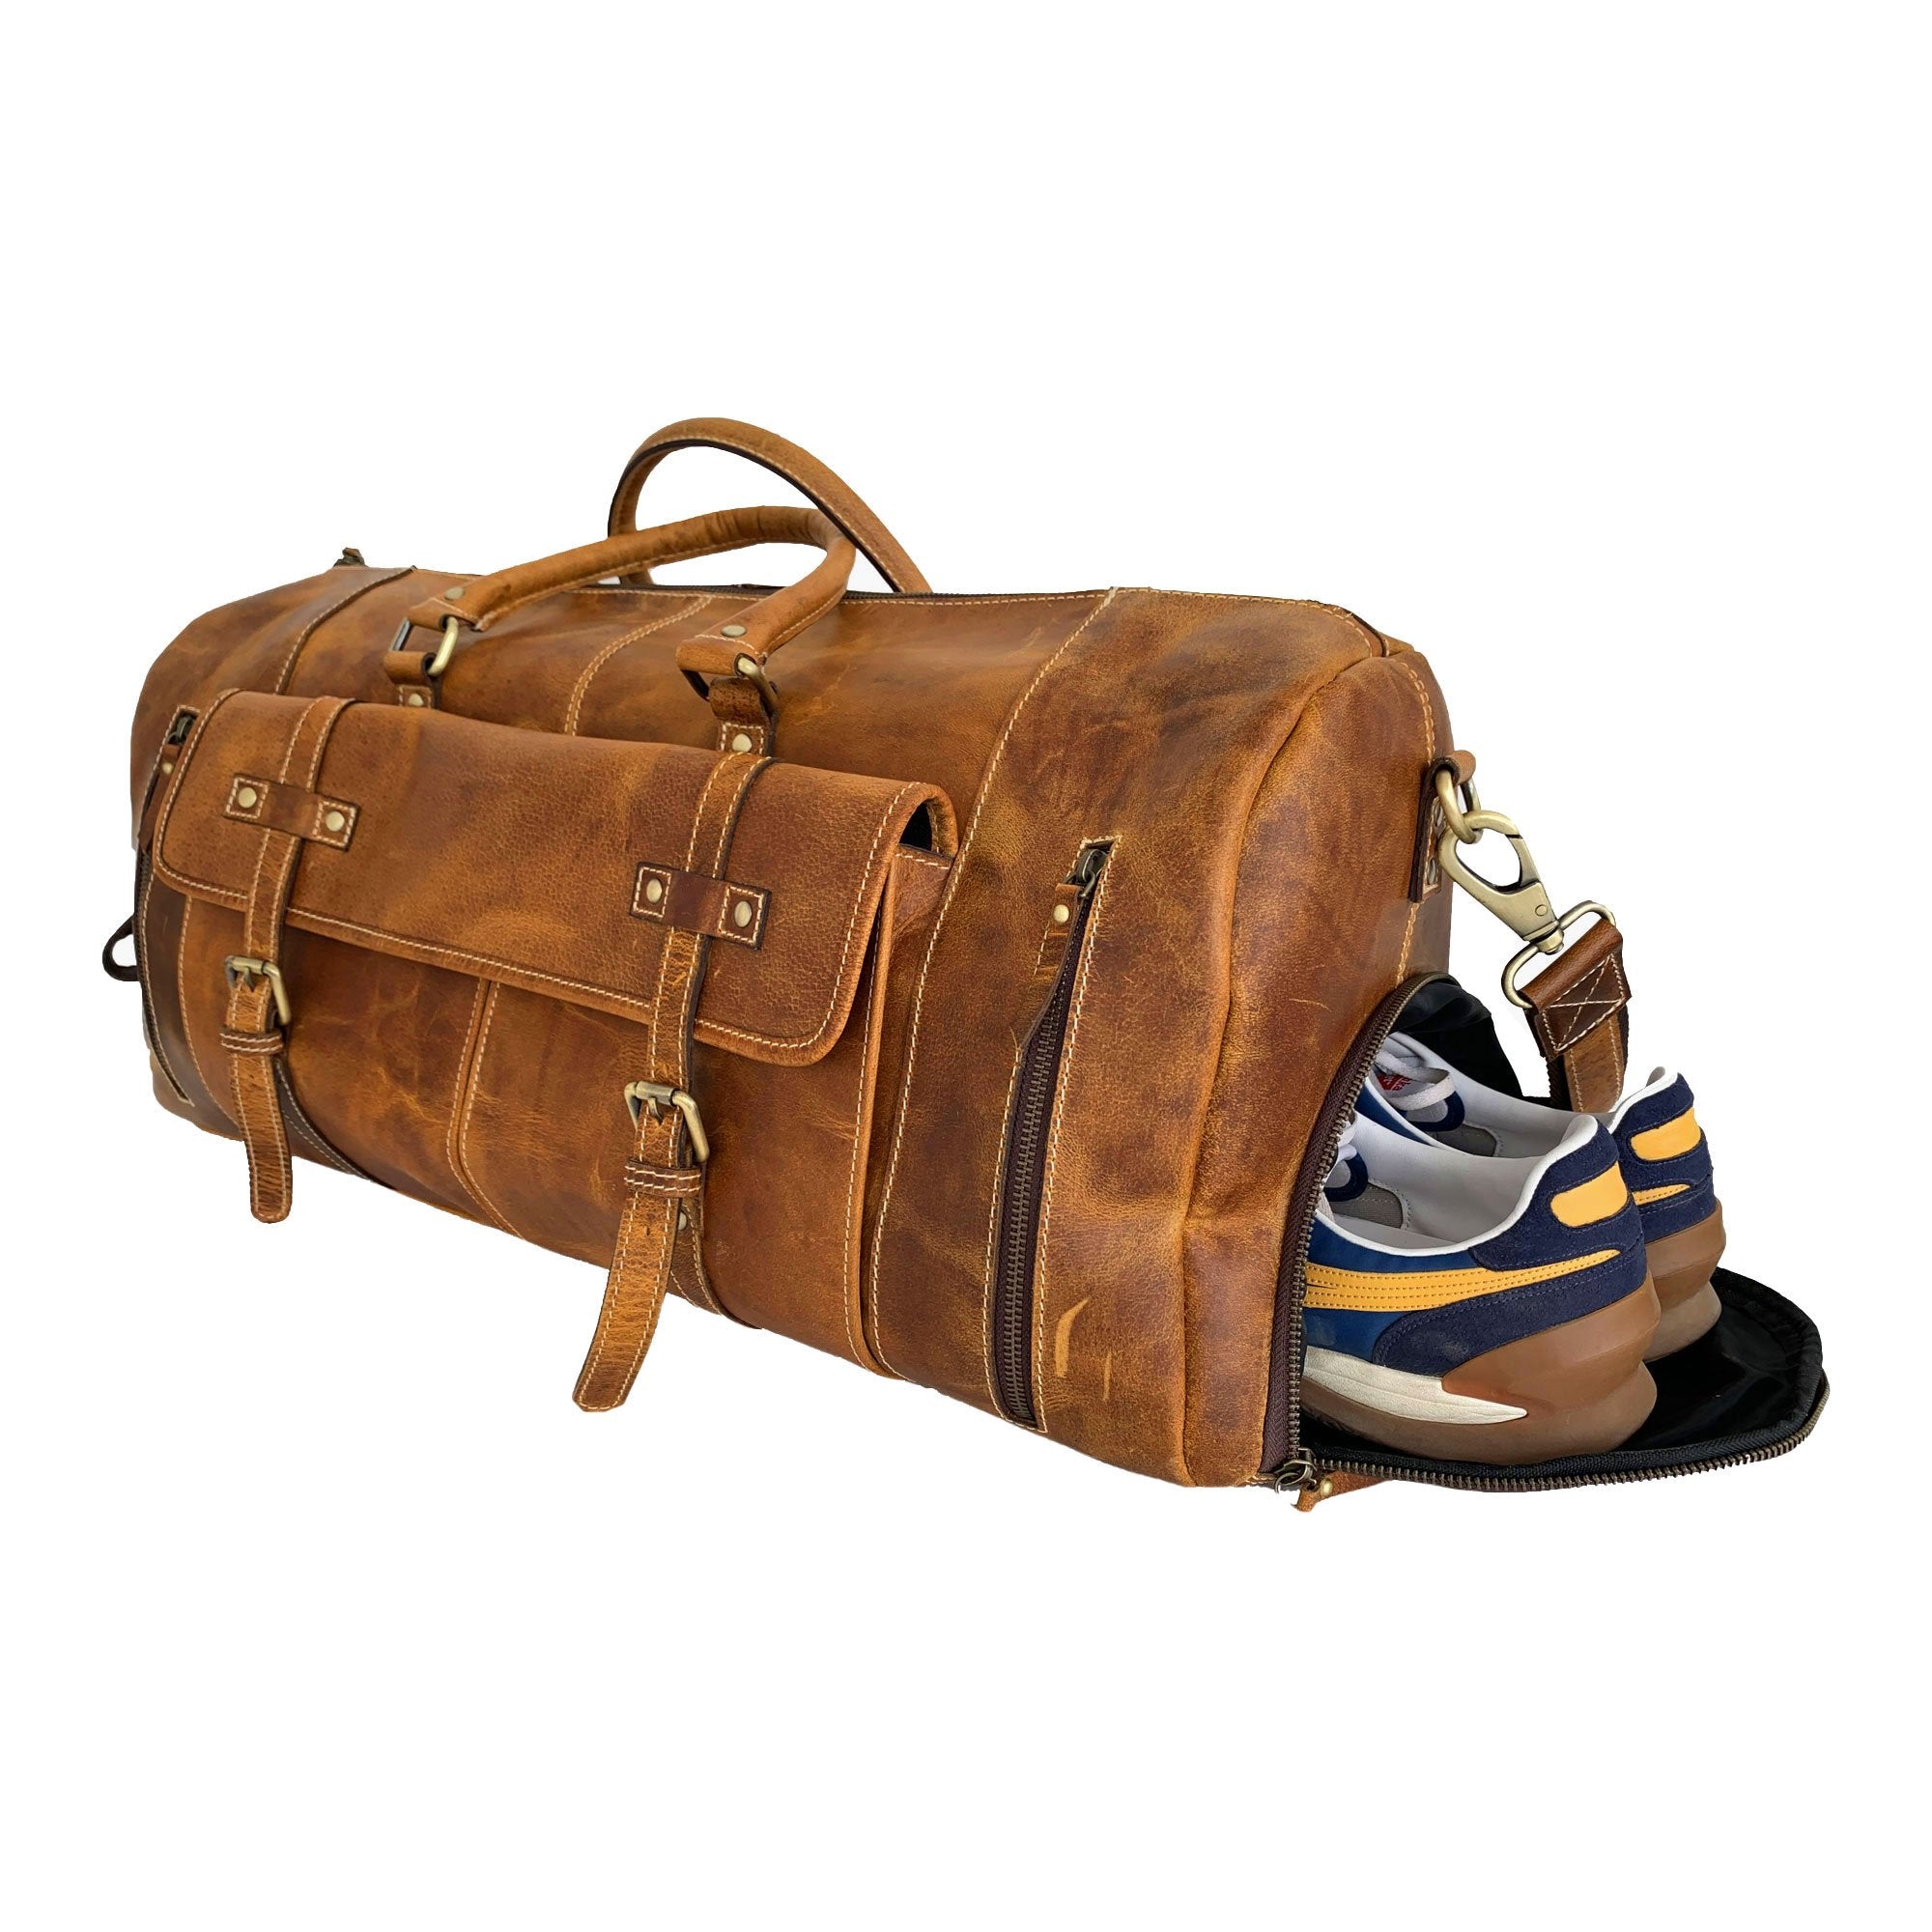 Leather Duffel Bag Travel Gym Sports Overnight Weekend Cabin Holdall by Komalc